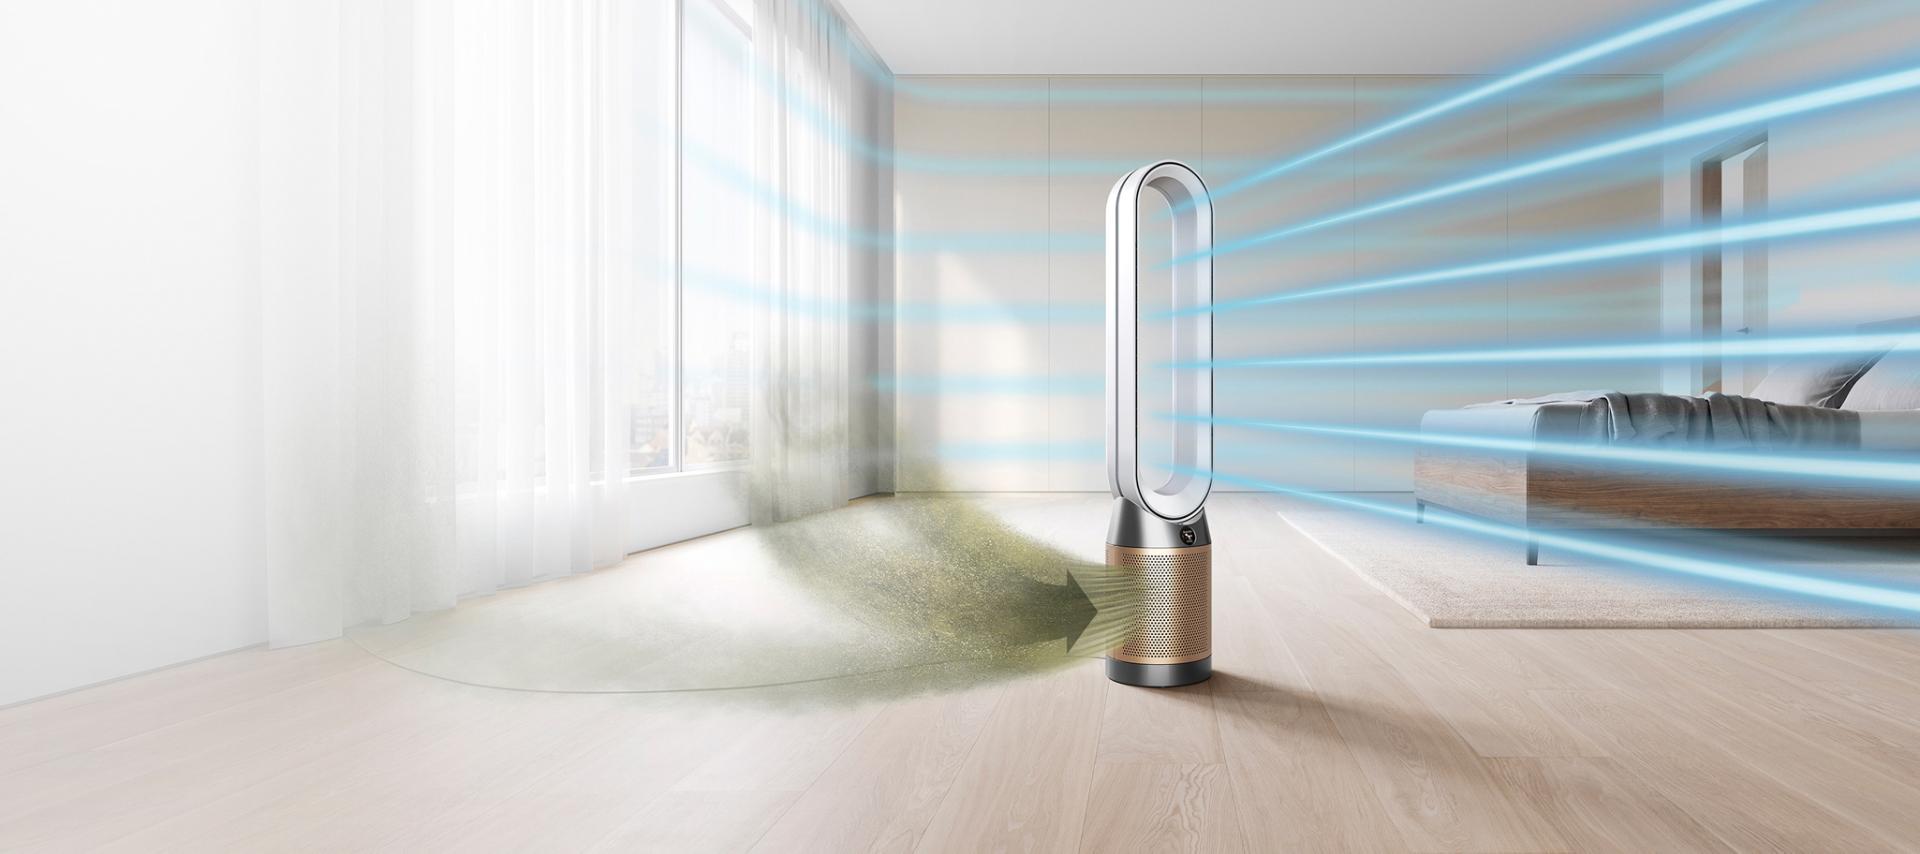 Dyson Purifier projecting purified air around a hotel room